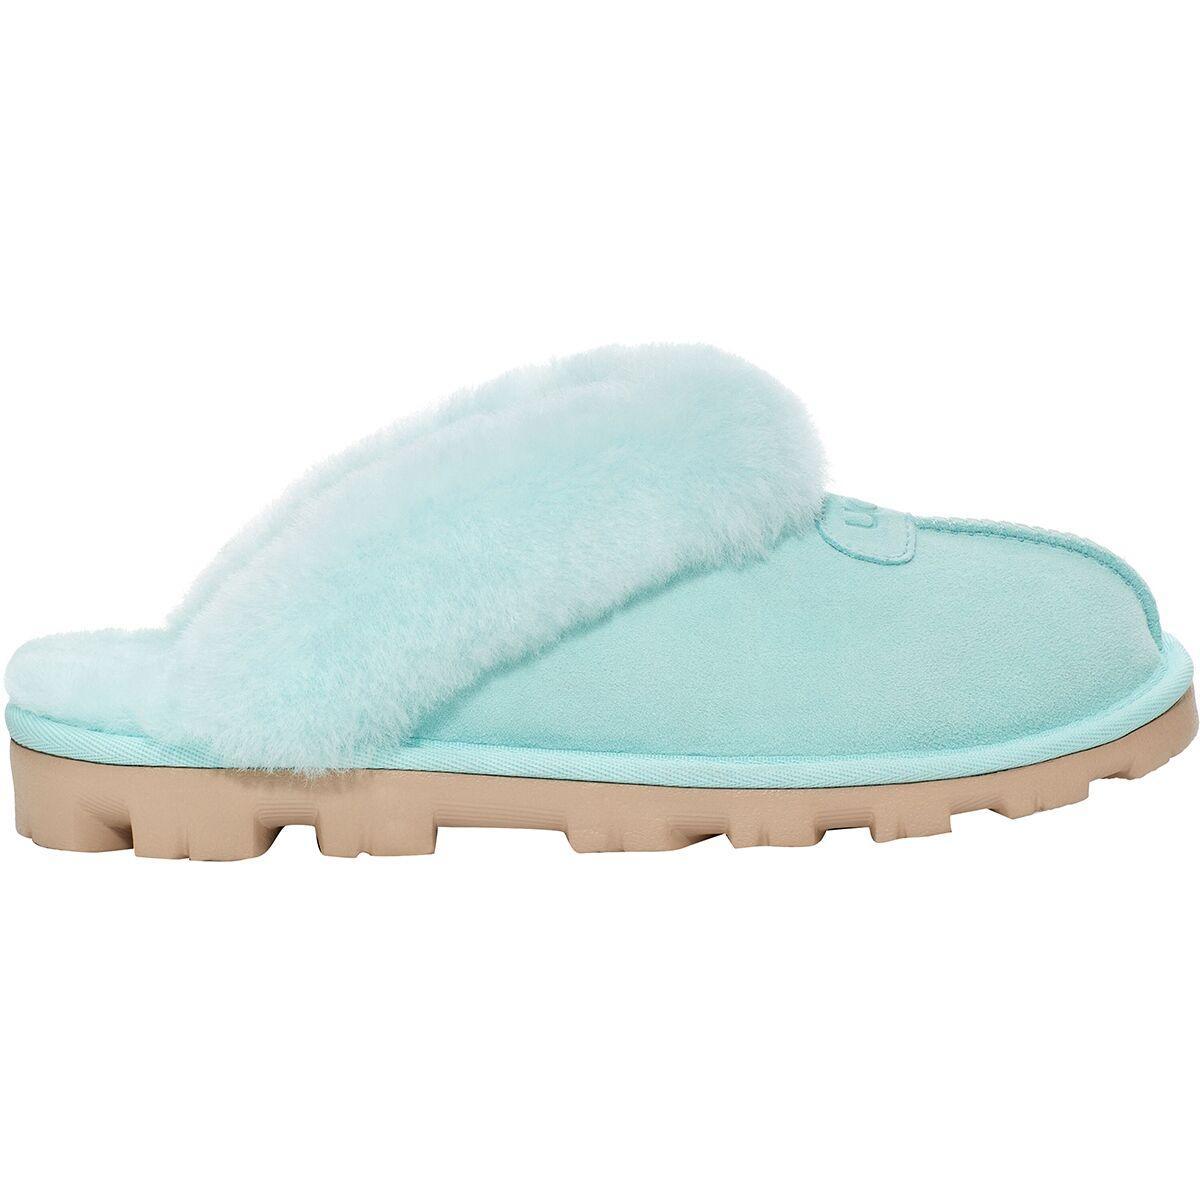 UGG Coquette Suede Slippers Product Image